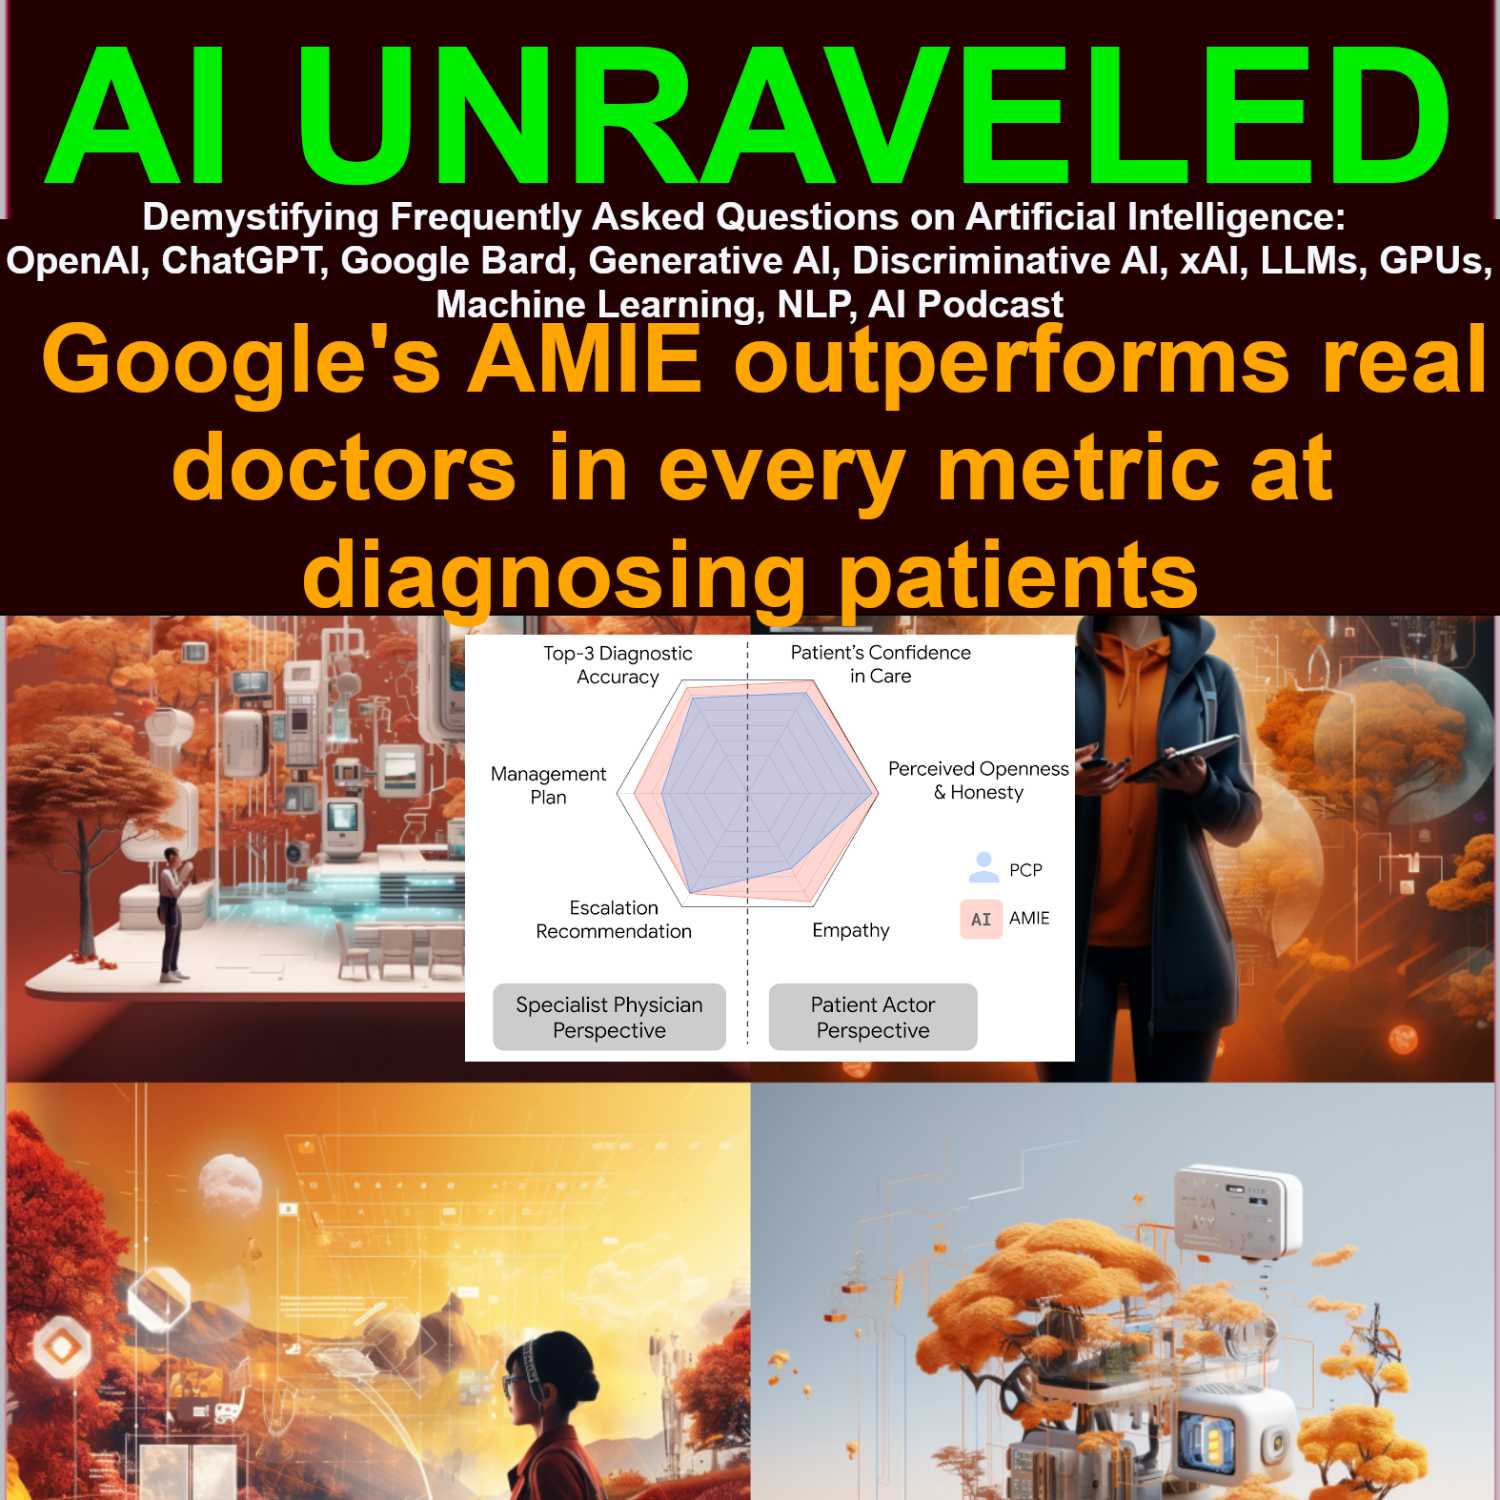 Revolution in Healthcare: Google’s AI (AMIE) Surpasses Doctors in Patient Diagnosis - A Detailed Analysis